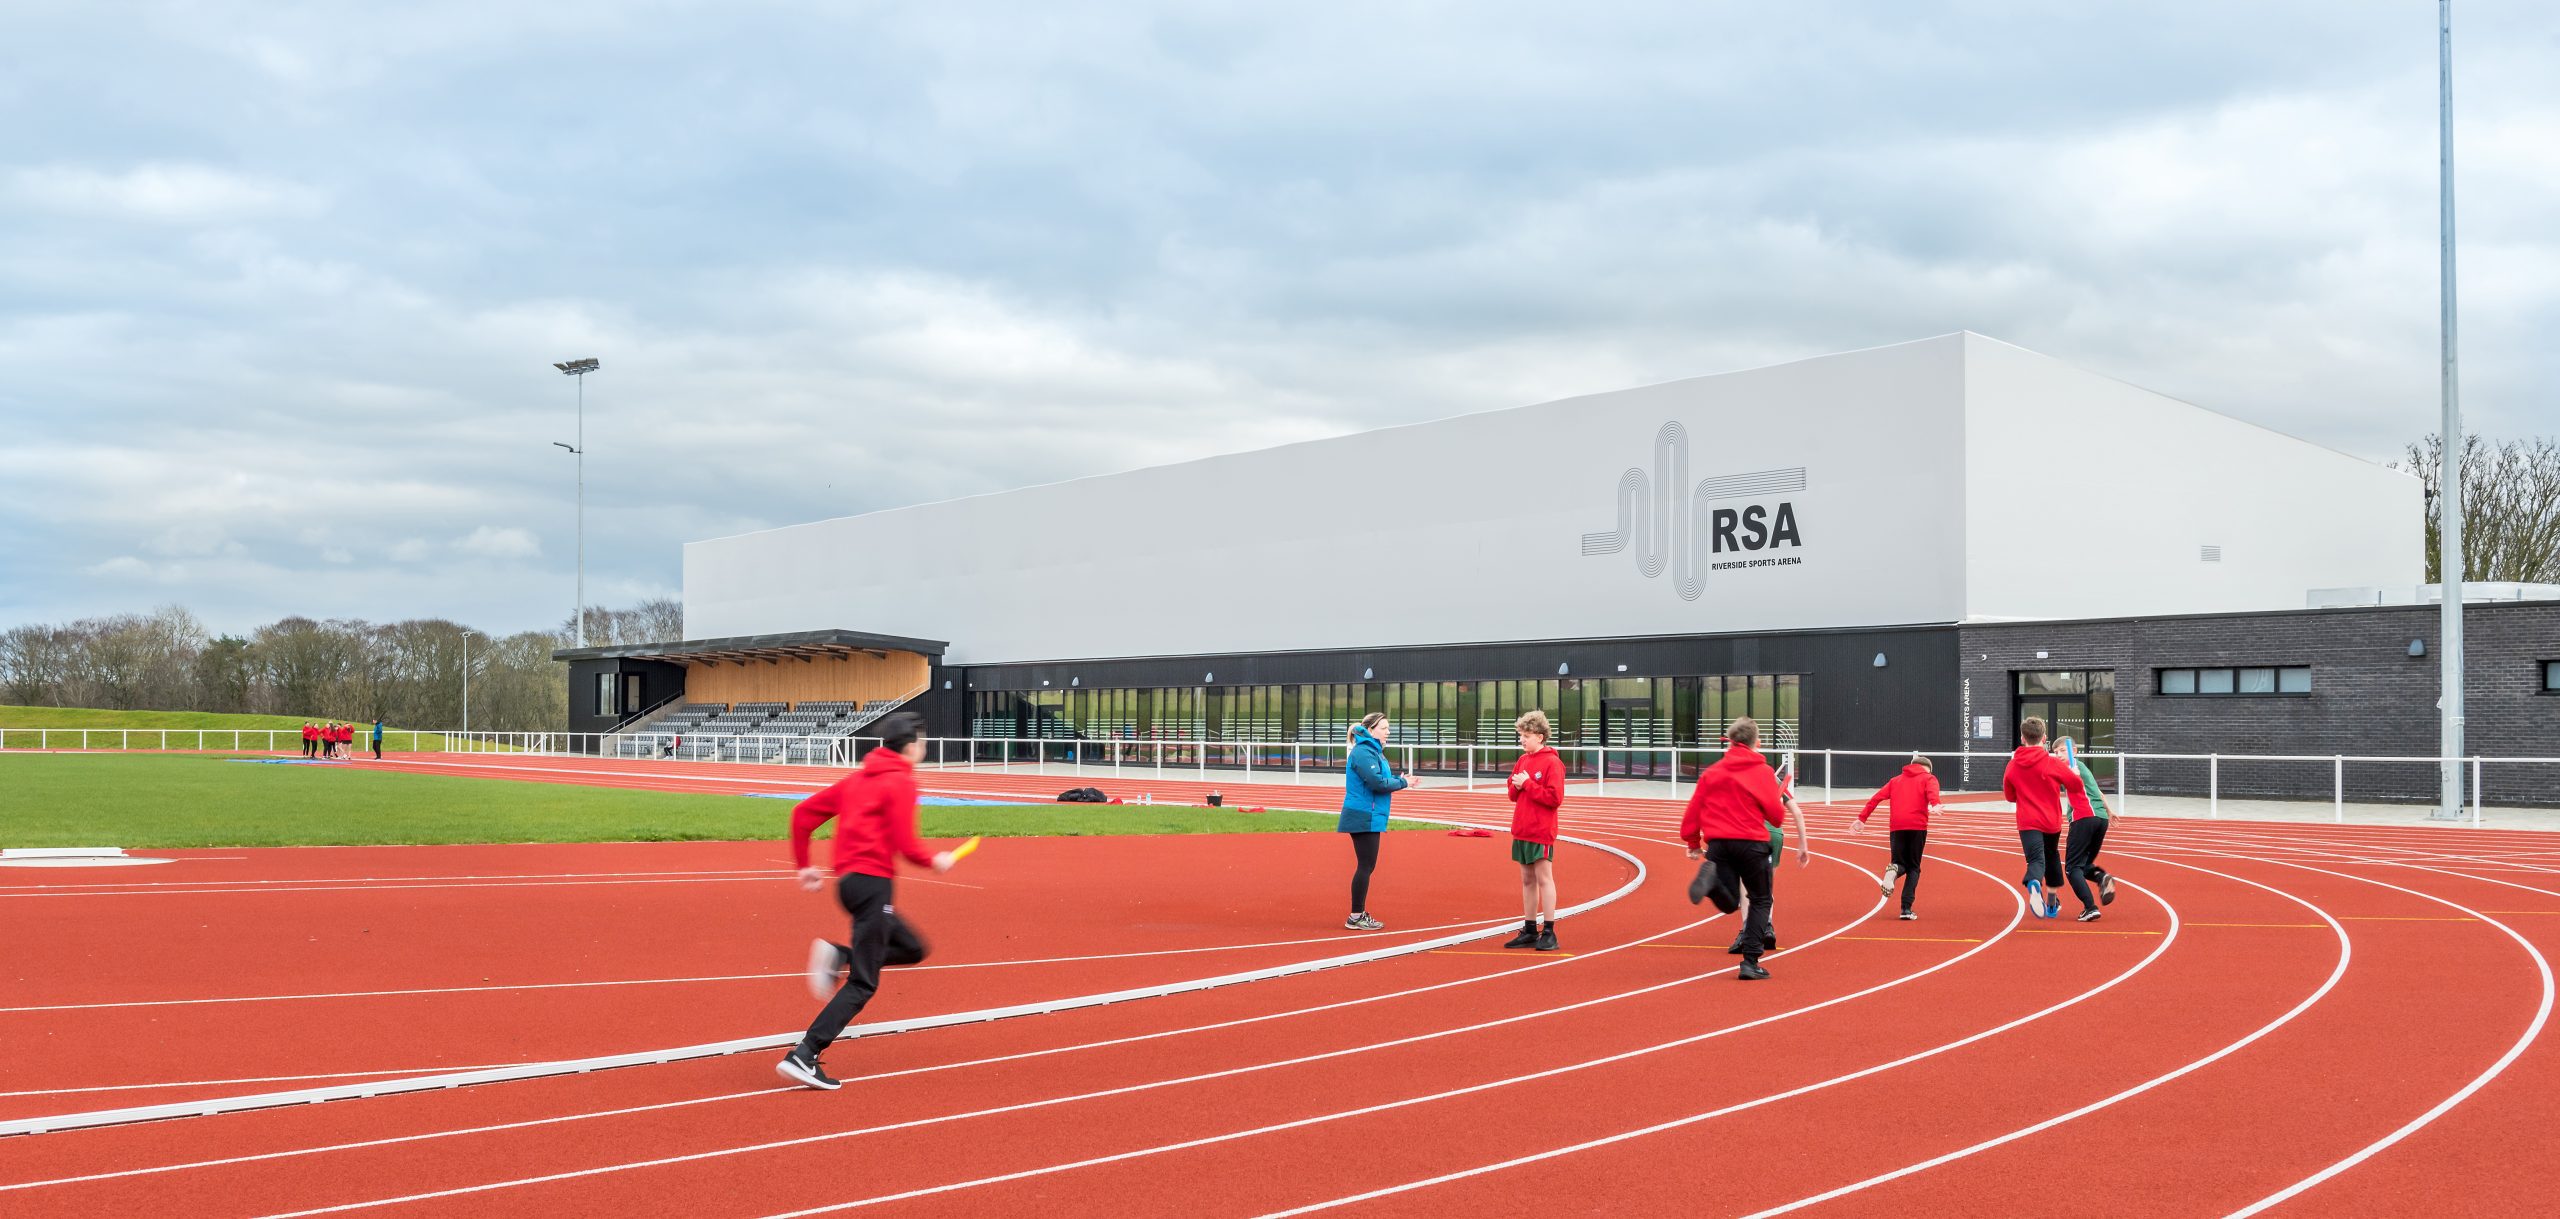 Architectural photography of Riverside Sports Arena in Craigie designed by Holmes Miller Architects